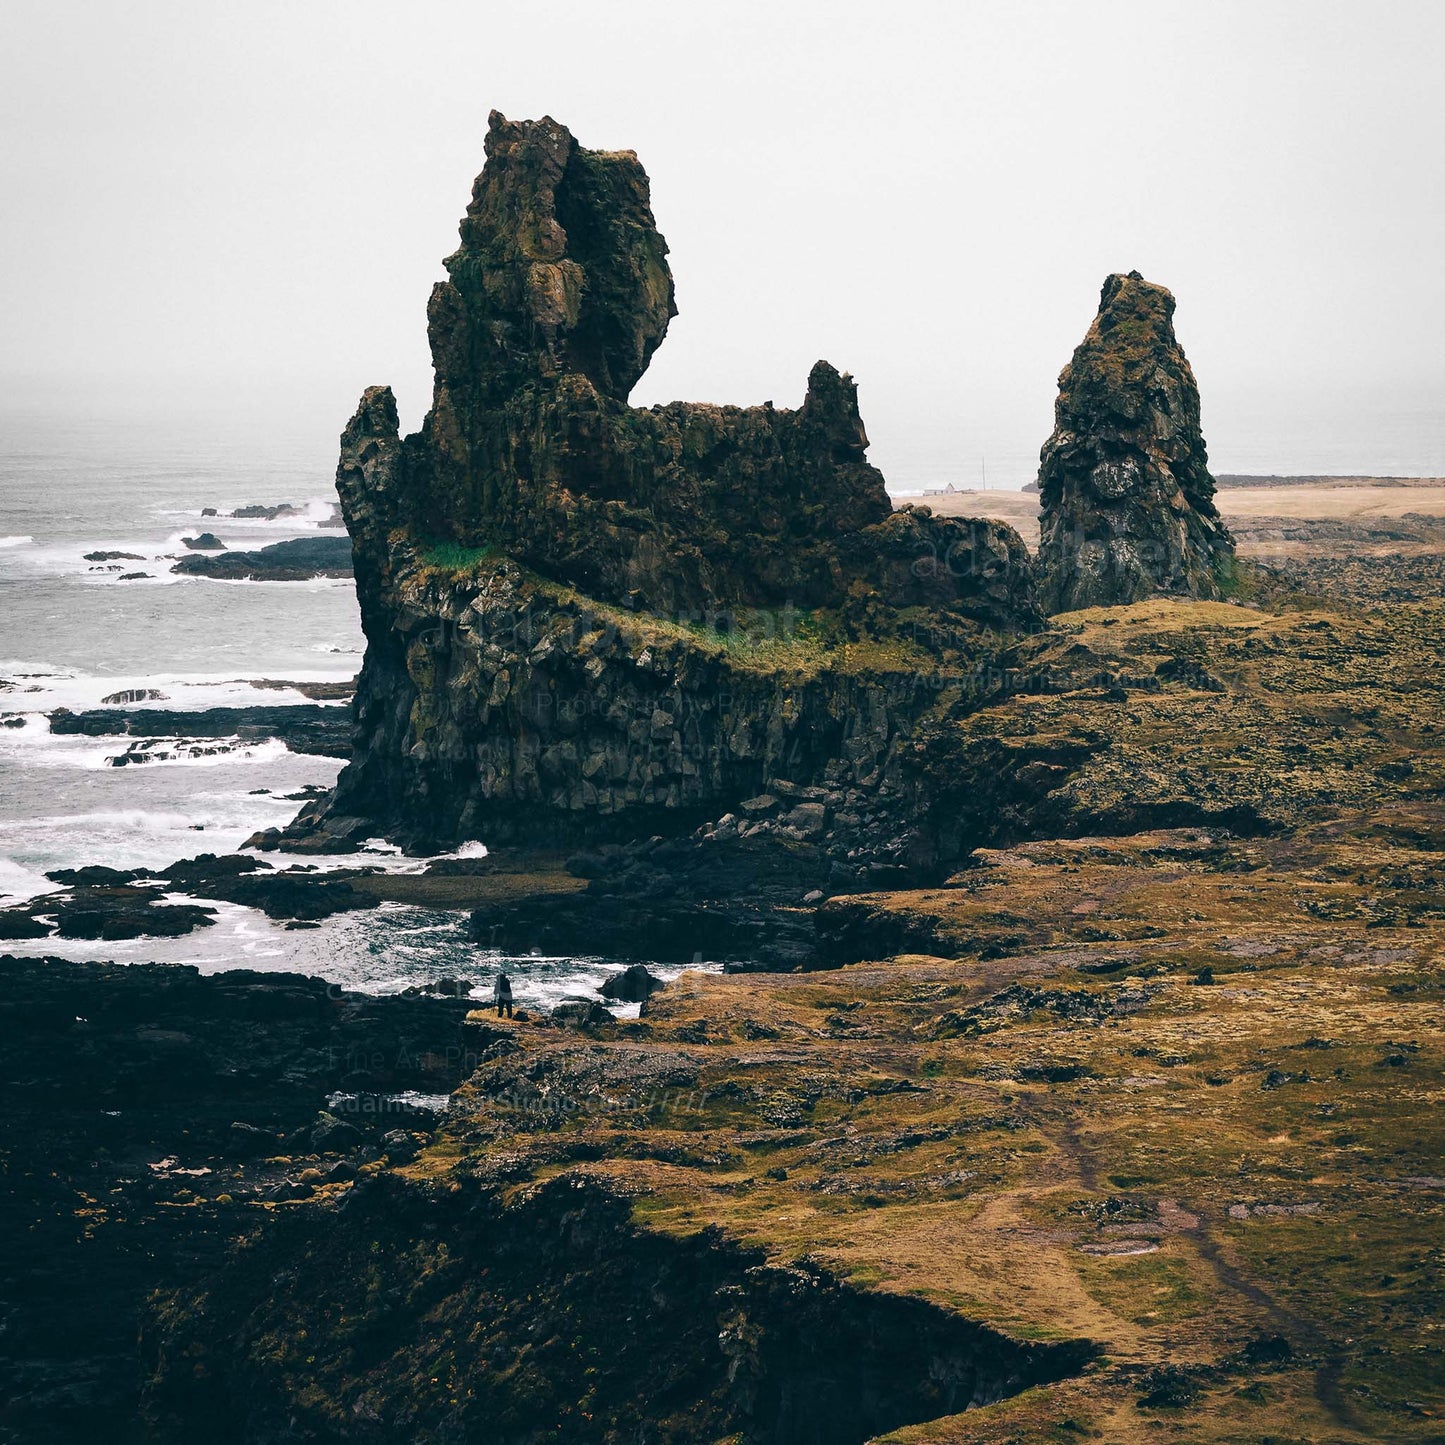 Londrangar rock formations in Iceland photography print